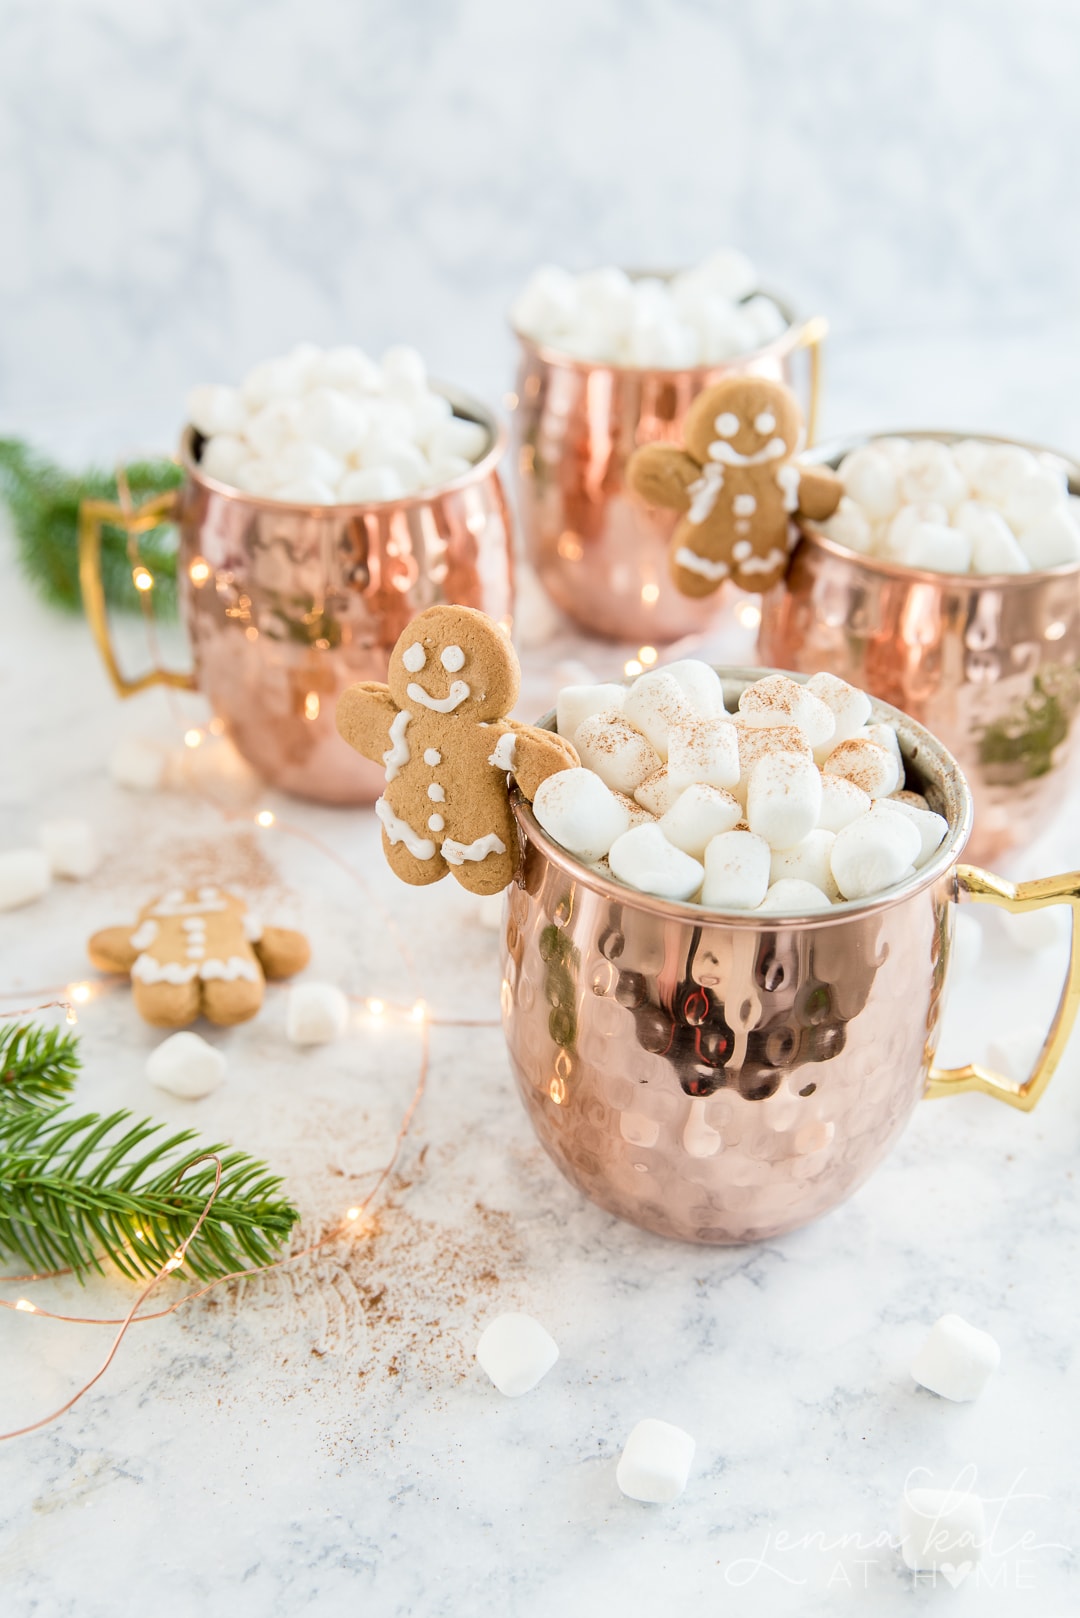 Copper mugs filled with gingerbread hot chocolate and marshmallows with a gingerbread man mug buddy